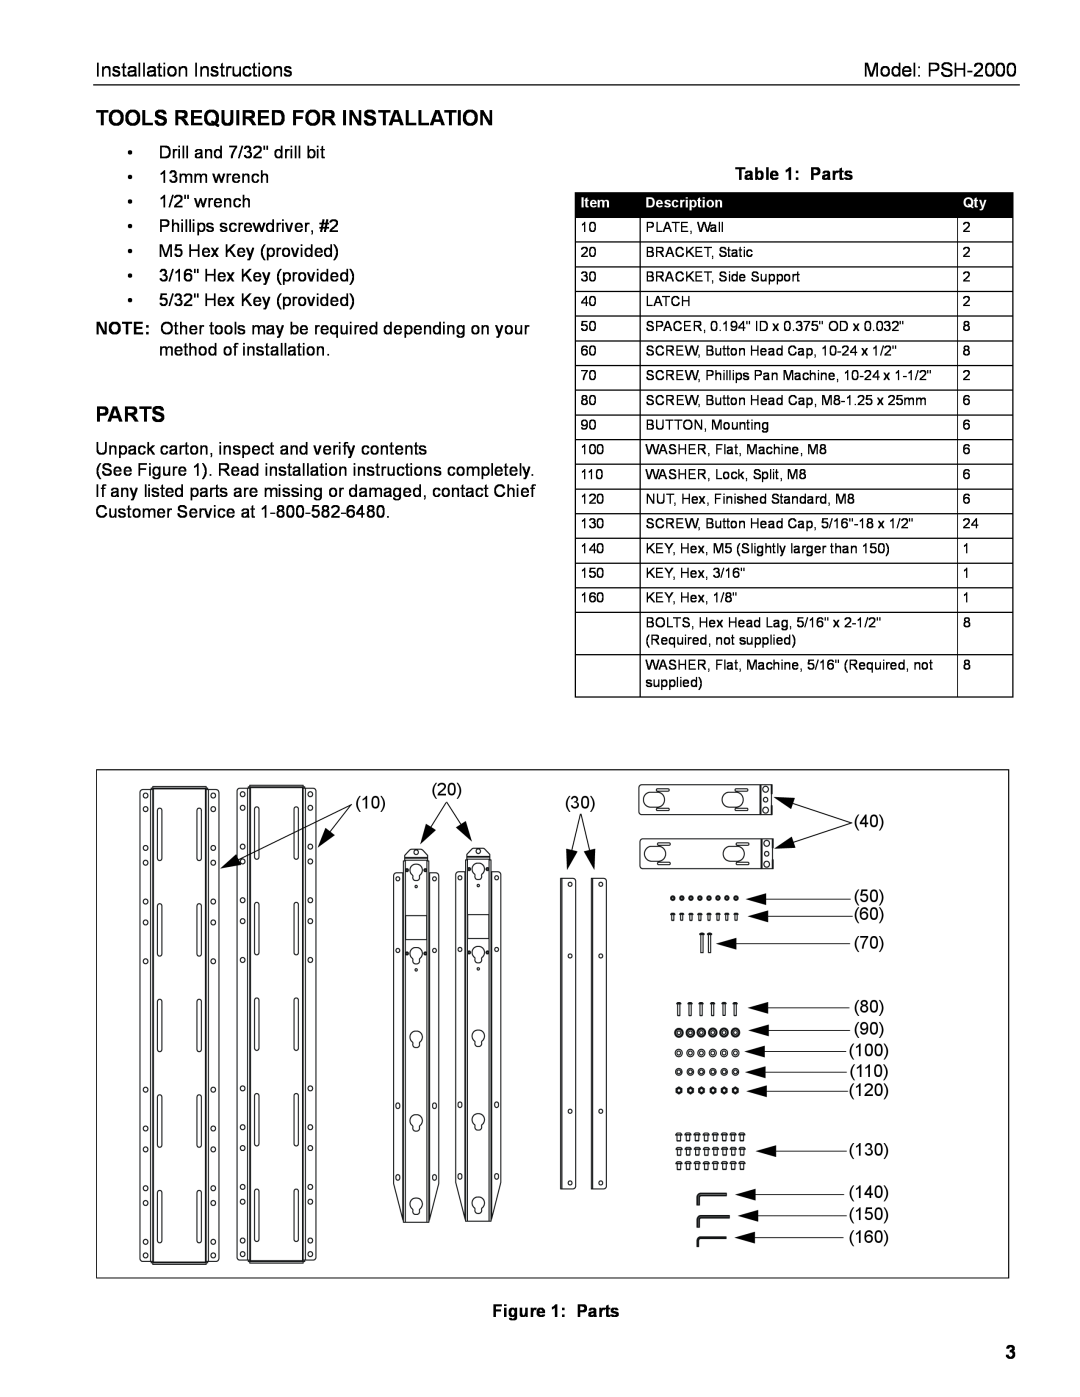 Chief Manufacturing Tools Required For Installation, Parts, Installation Instructions, Model PSH-2000 